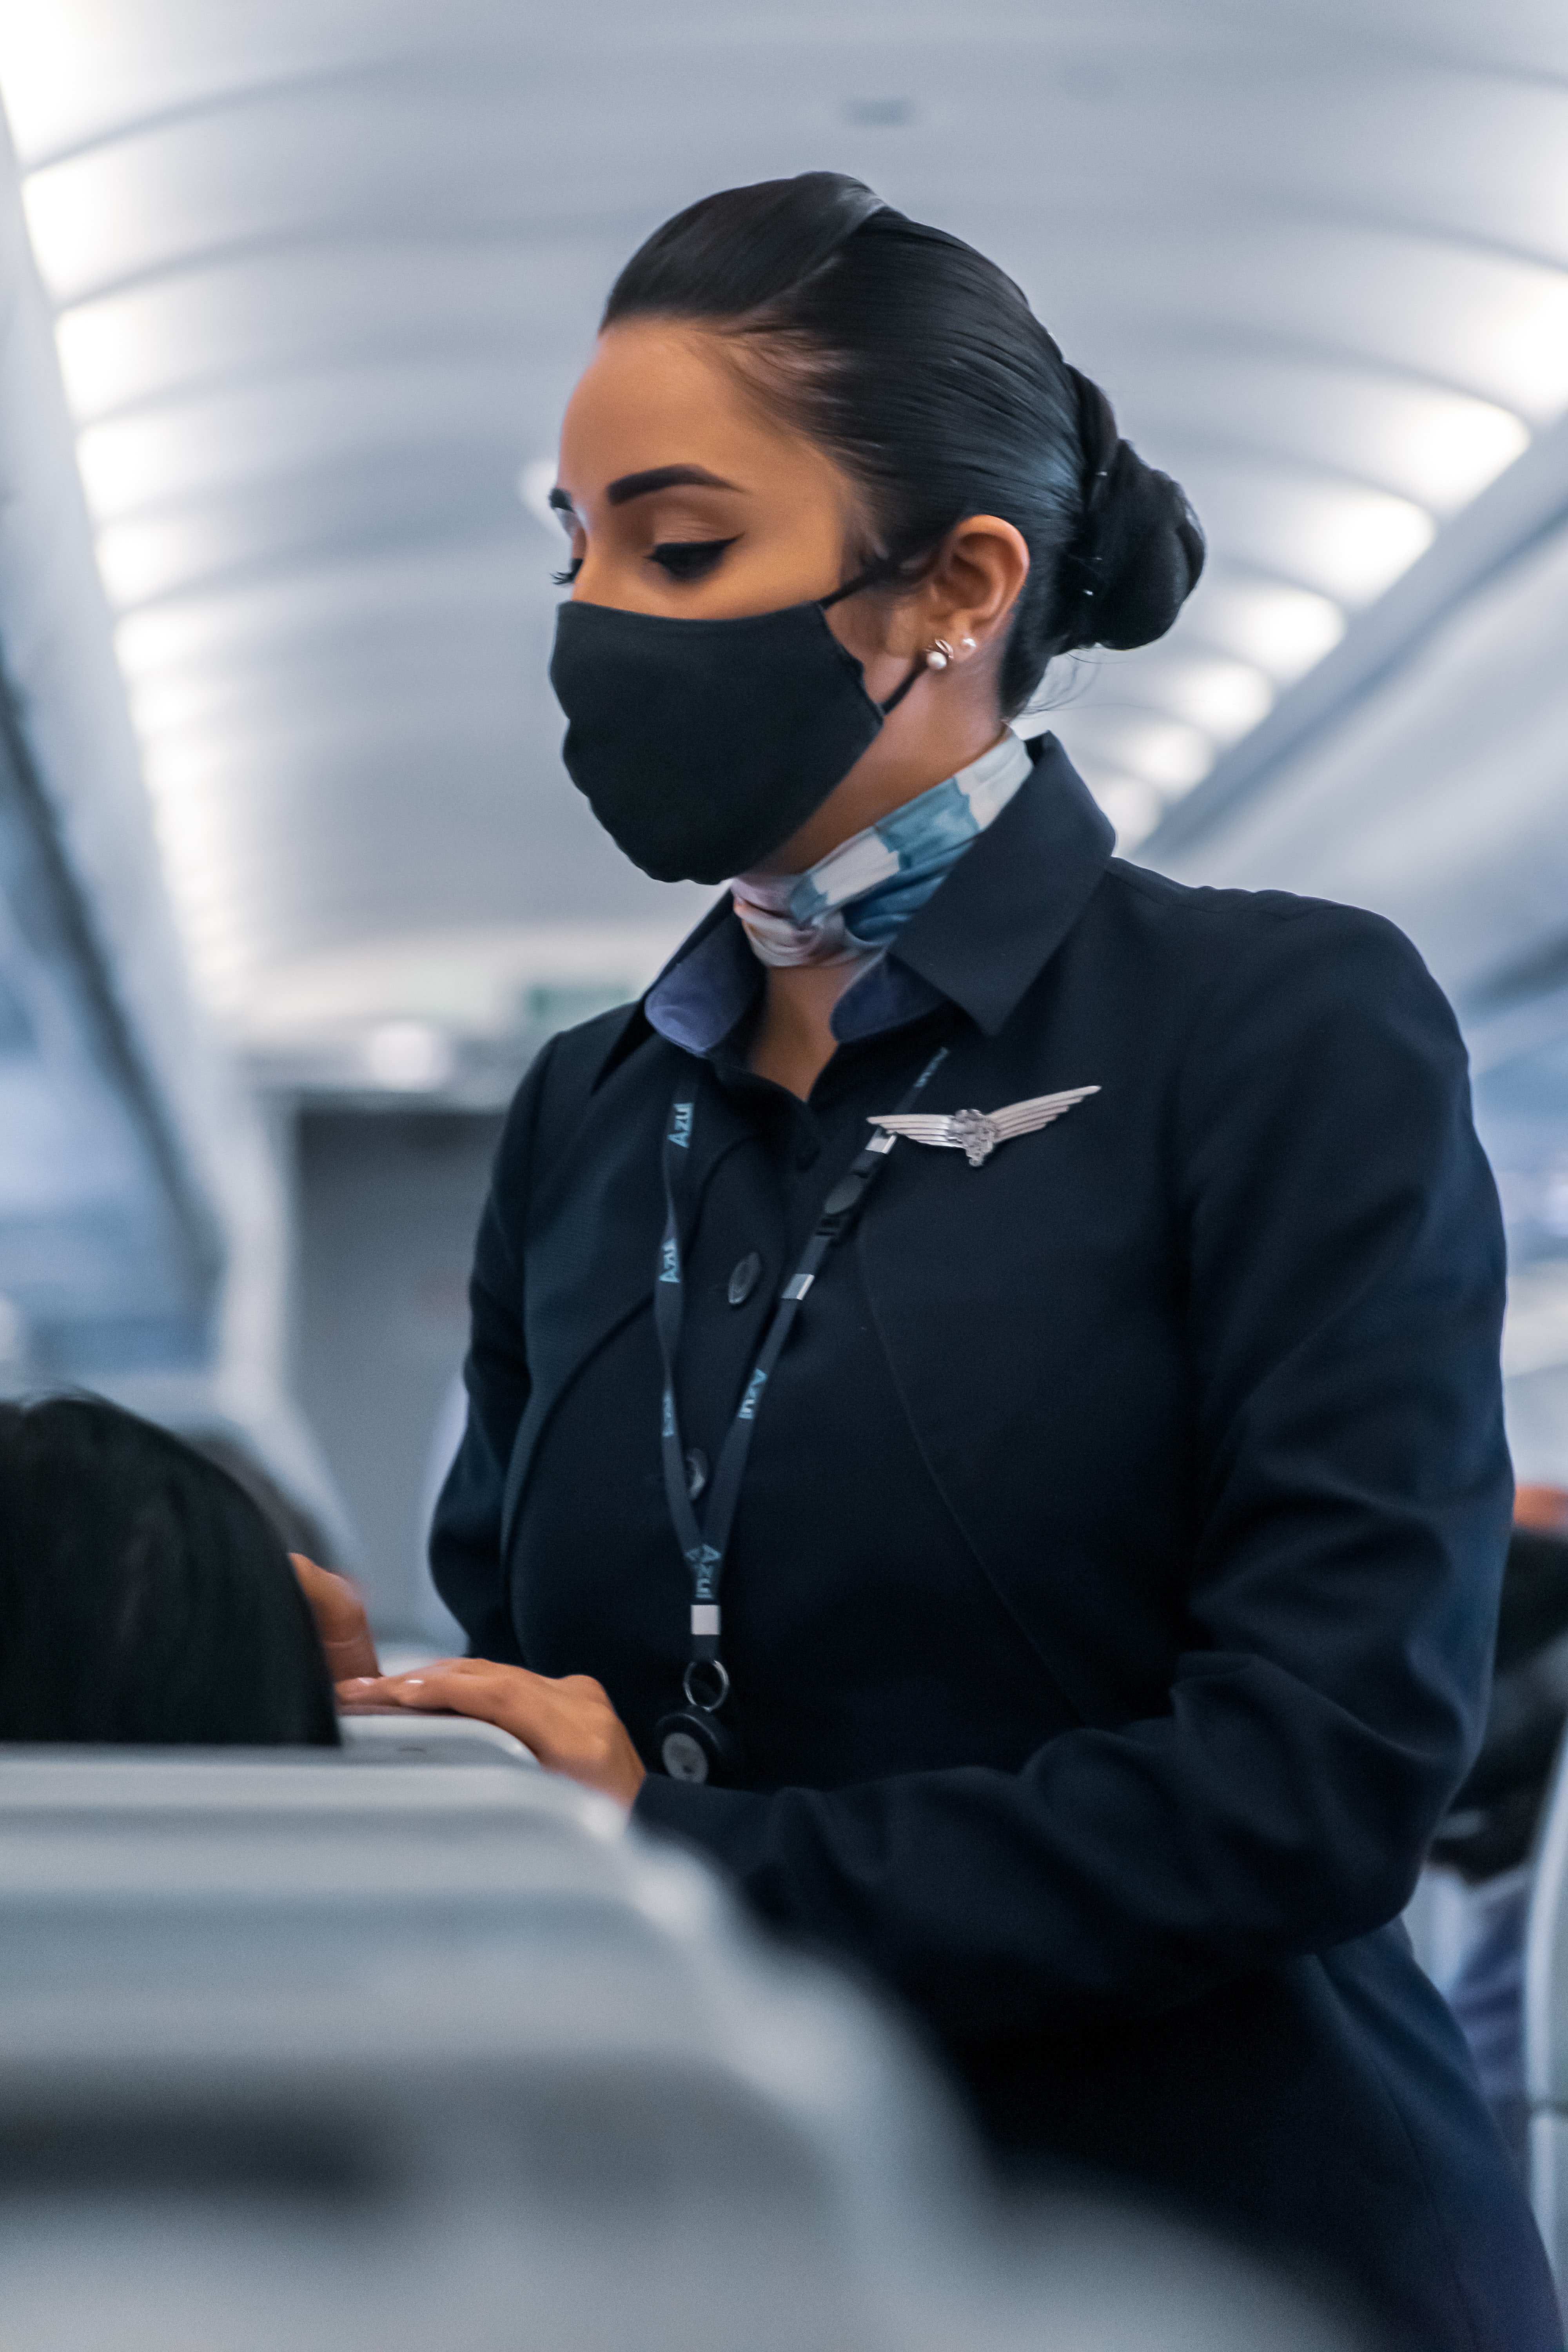 On the plane headed to Connecticut, the woman had no idea how to fix the problem, so she decided to reach out to a flight attendant | Source: Pexels